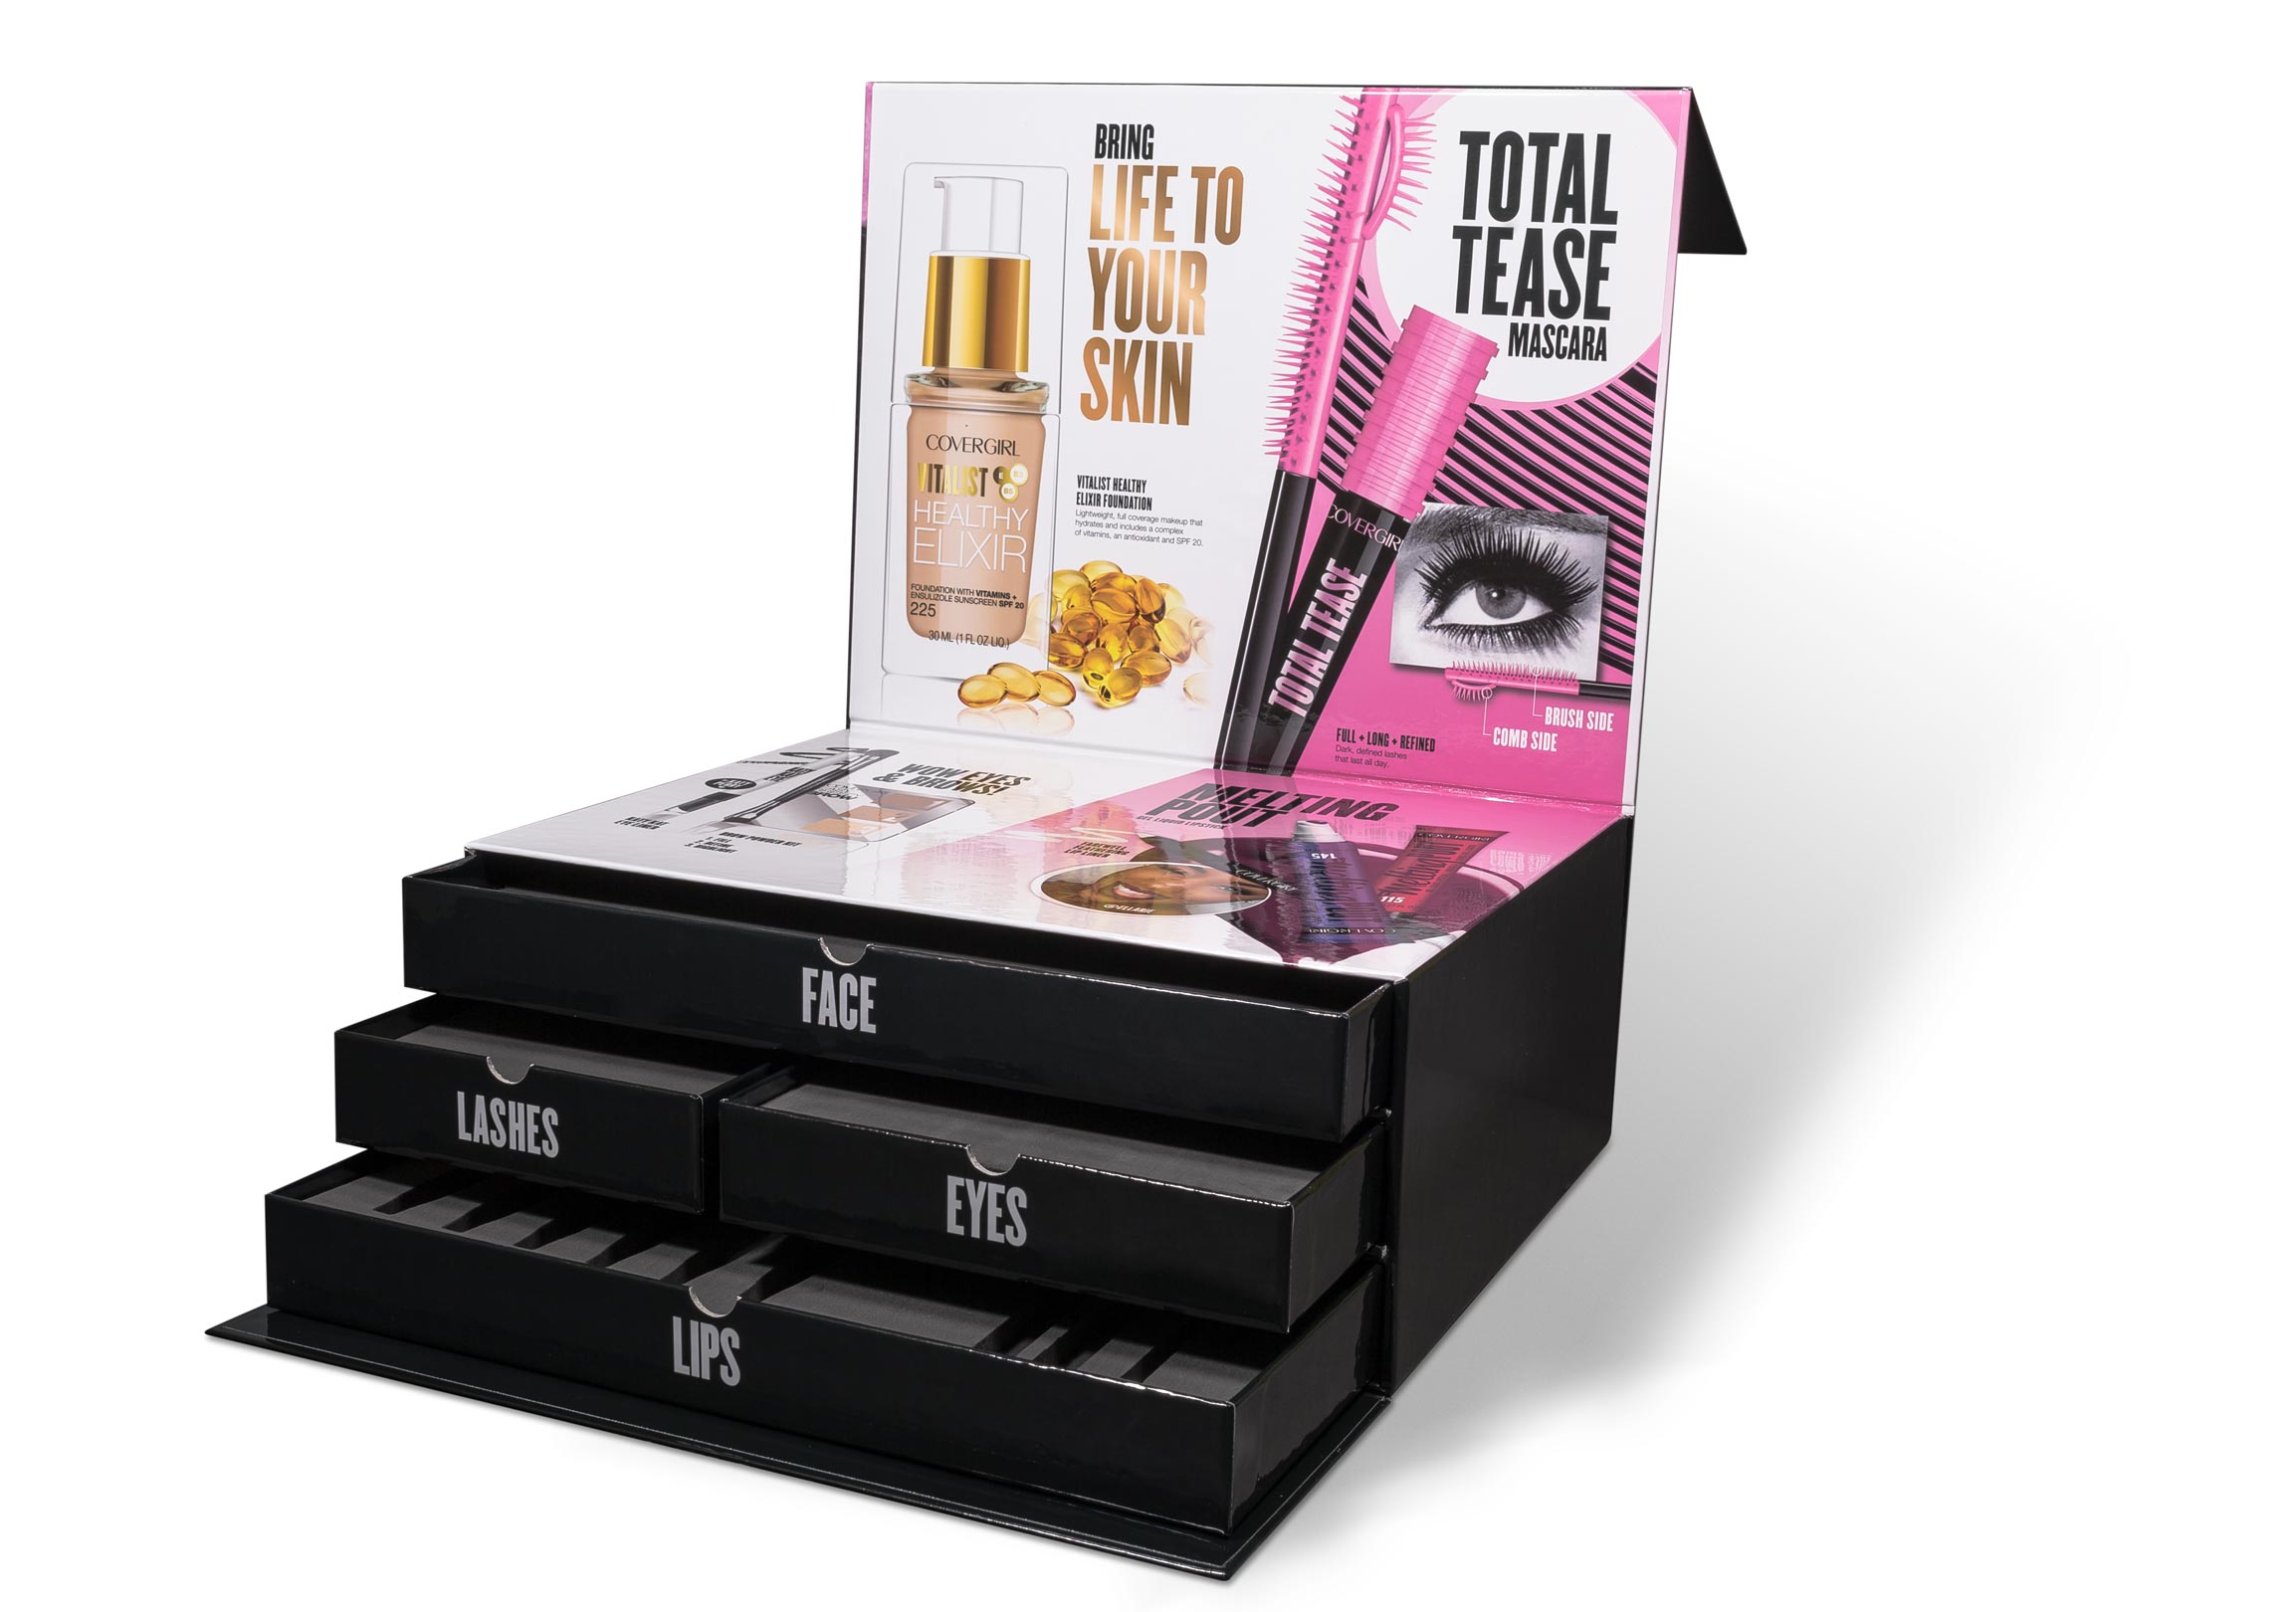 press kit or product sample kit for covergirl cosmetics